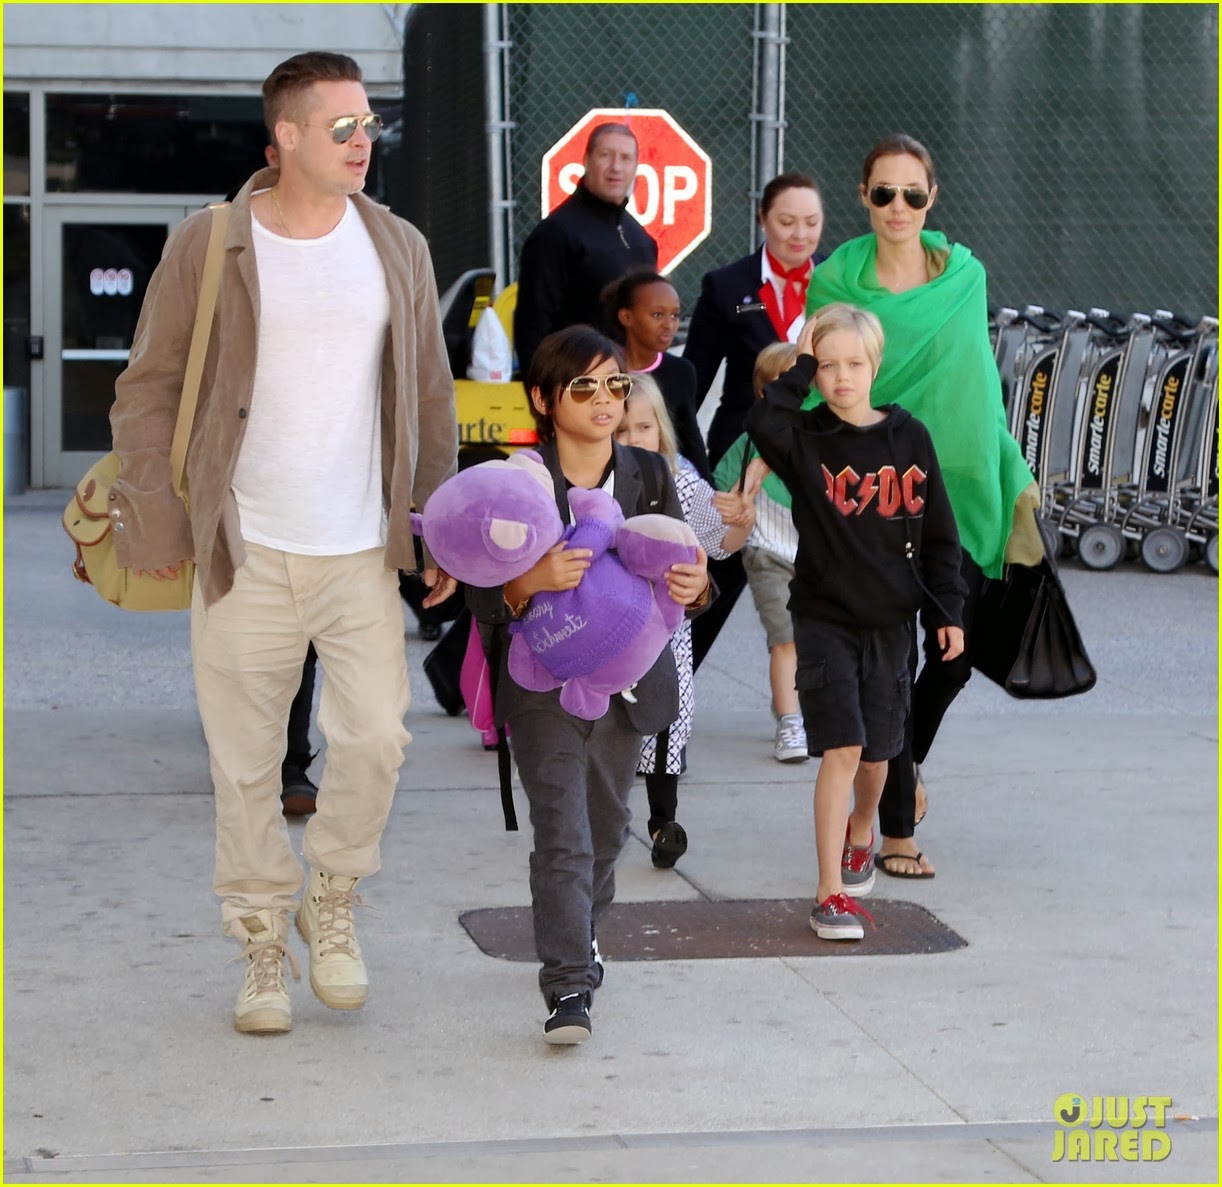 Celeb Diary: Angelina Jolie and Brad Pitt land at LAX Airport with all six of their ...